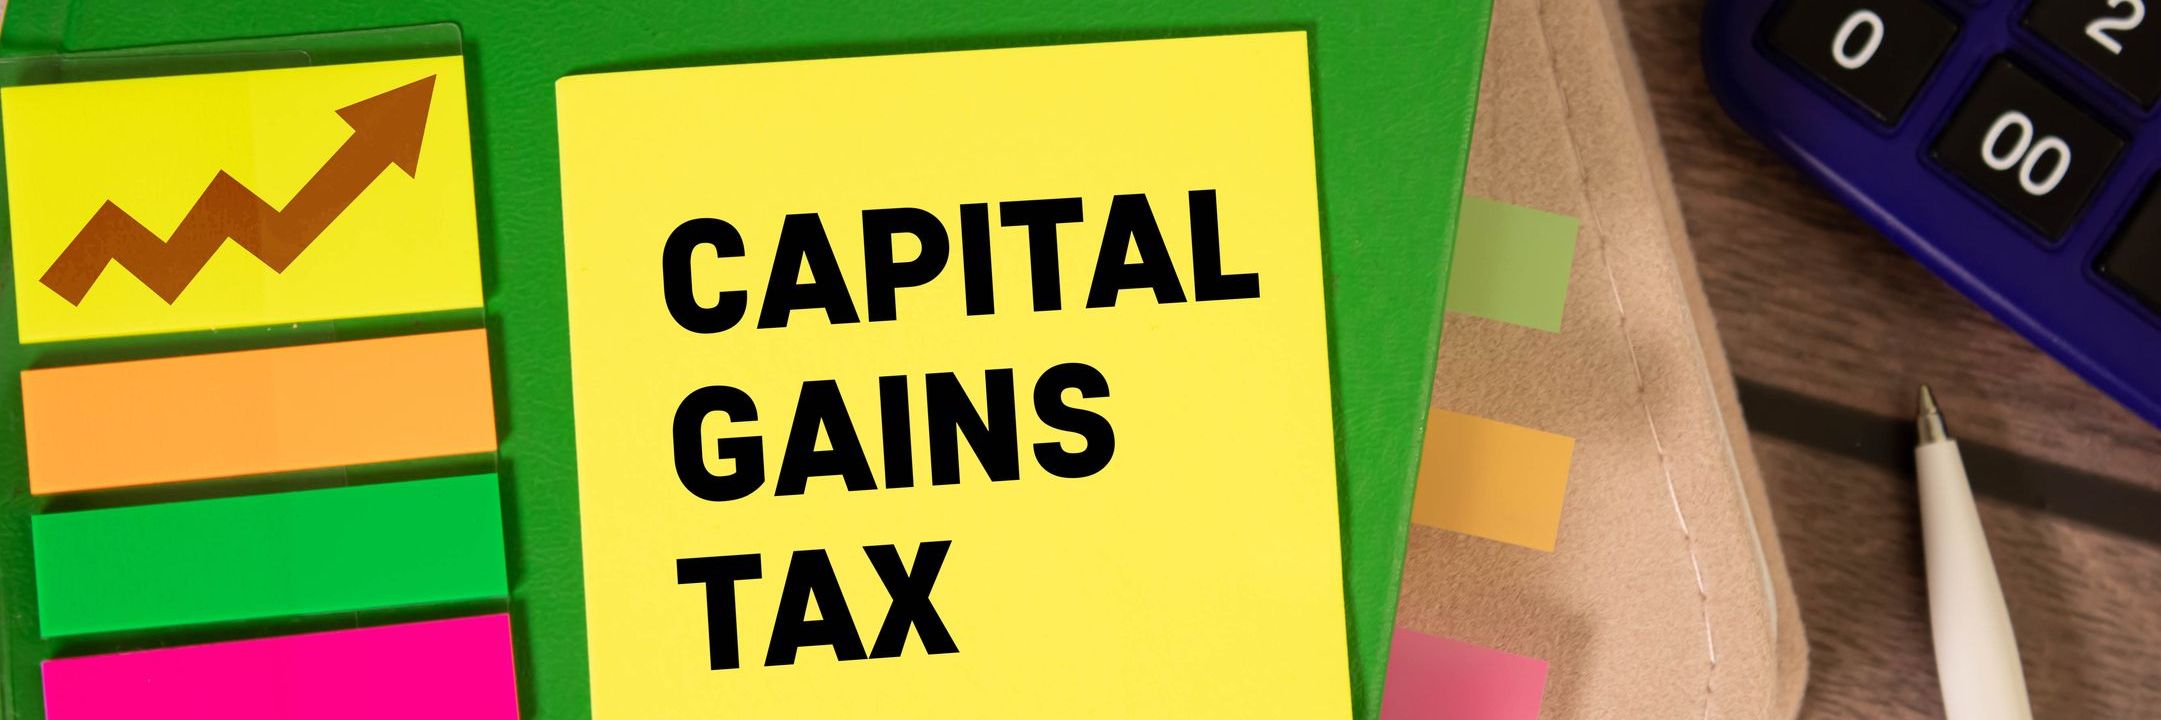 Capital Gains Tax - 2024 Virtual Conference